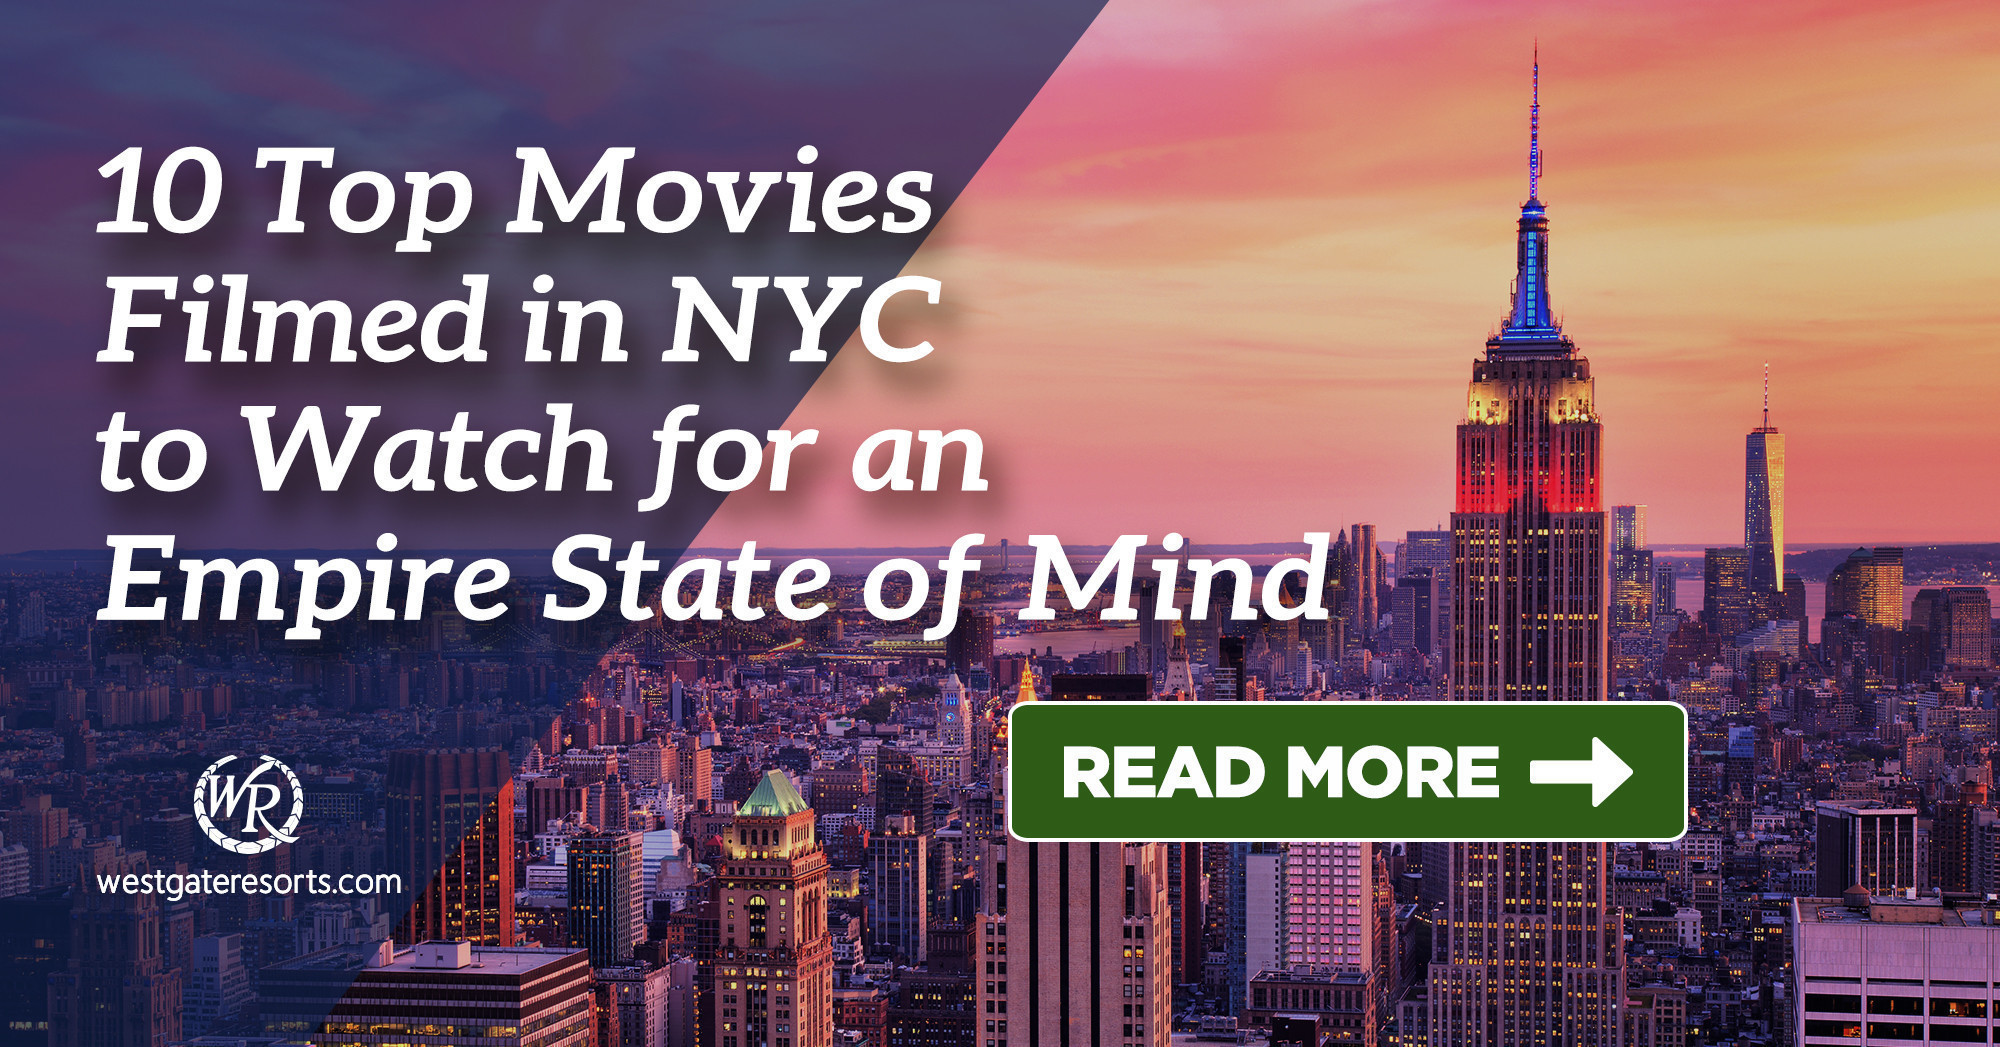 10 Top Movies Filmed in NYC to Watch for an Empire State of Mind